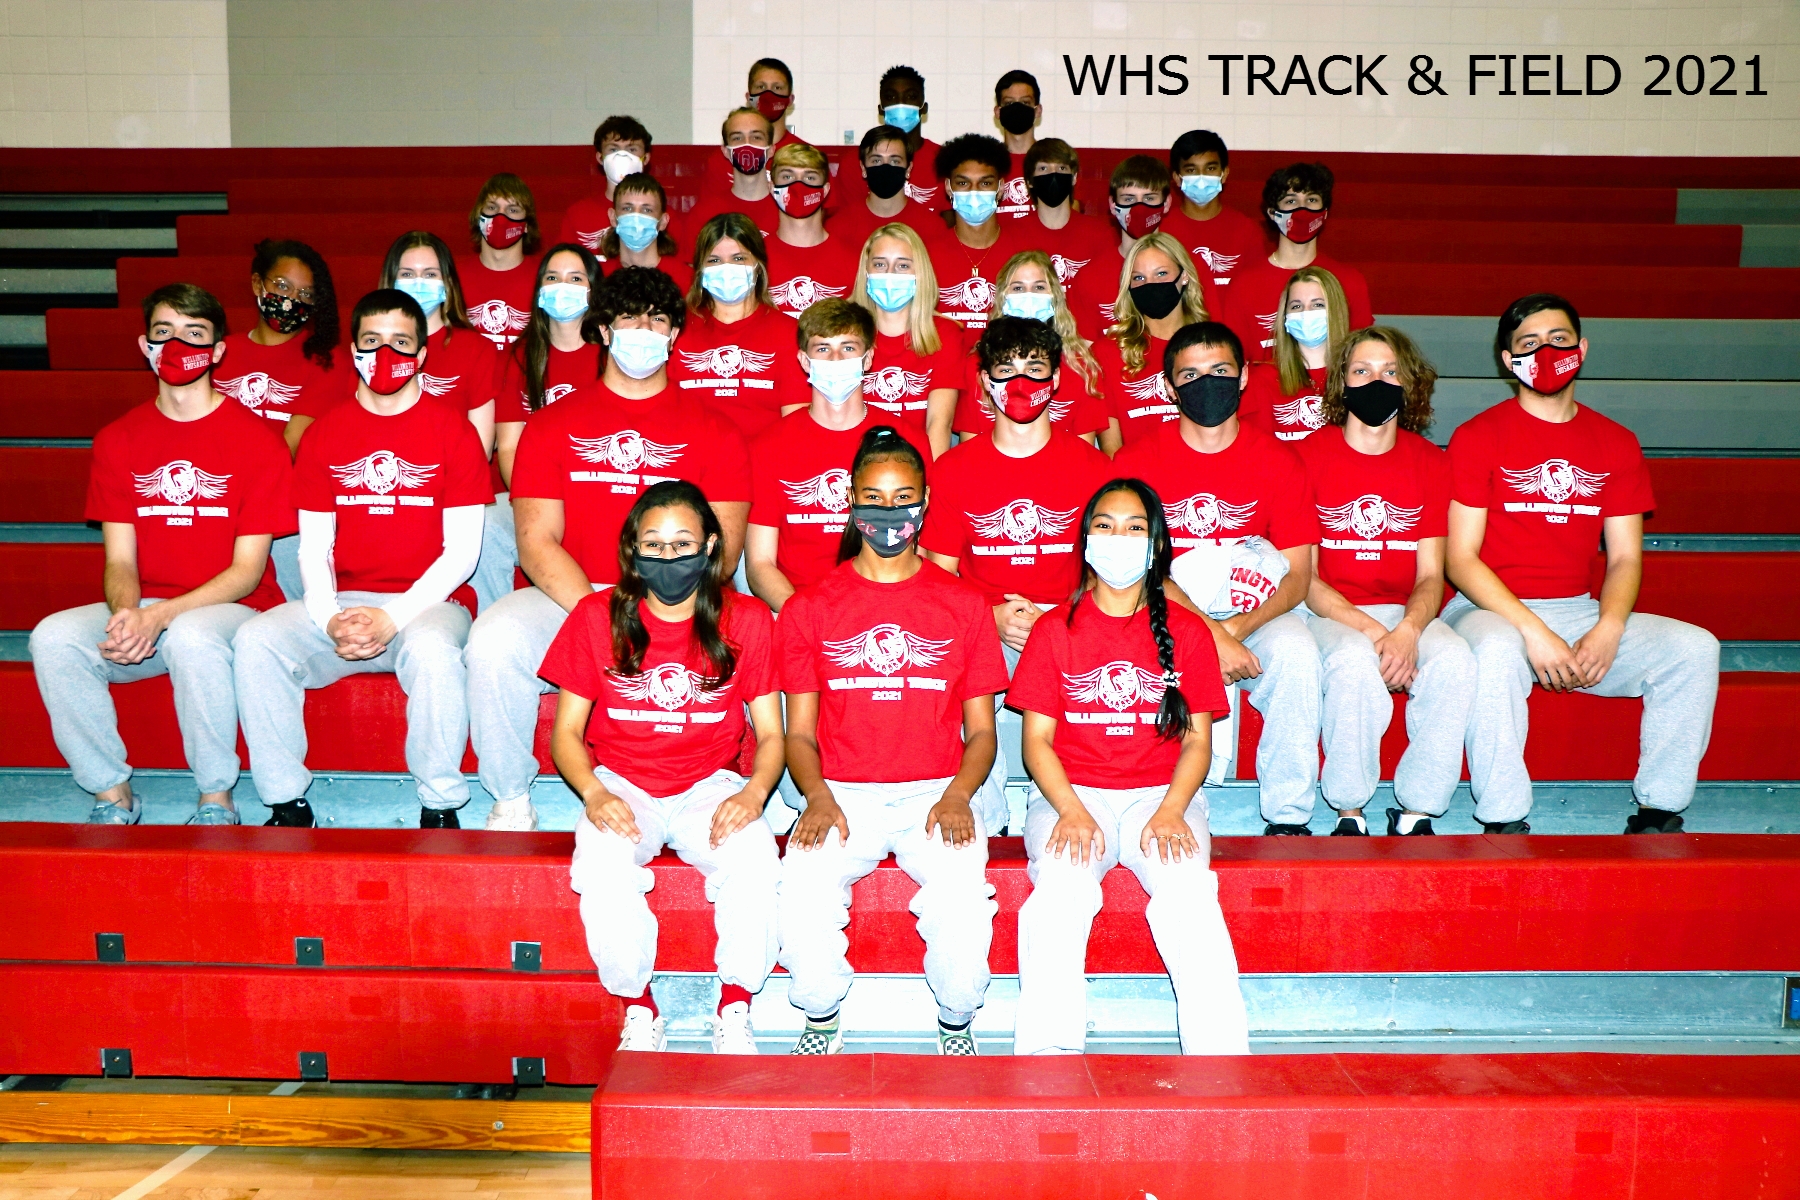 WHS Track & Field 2021